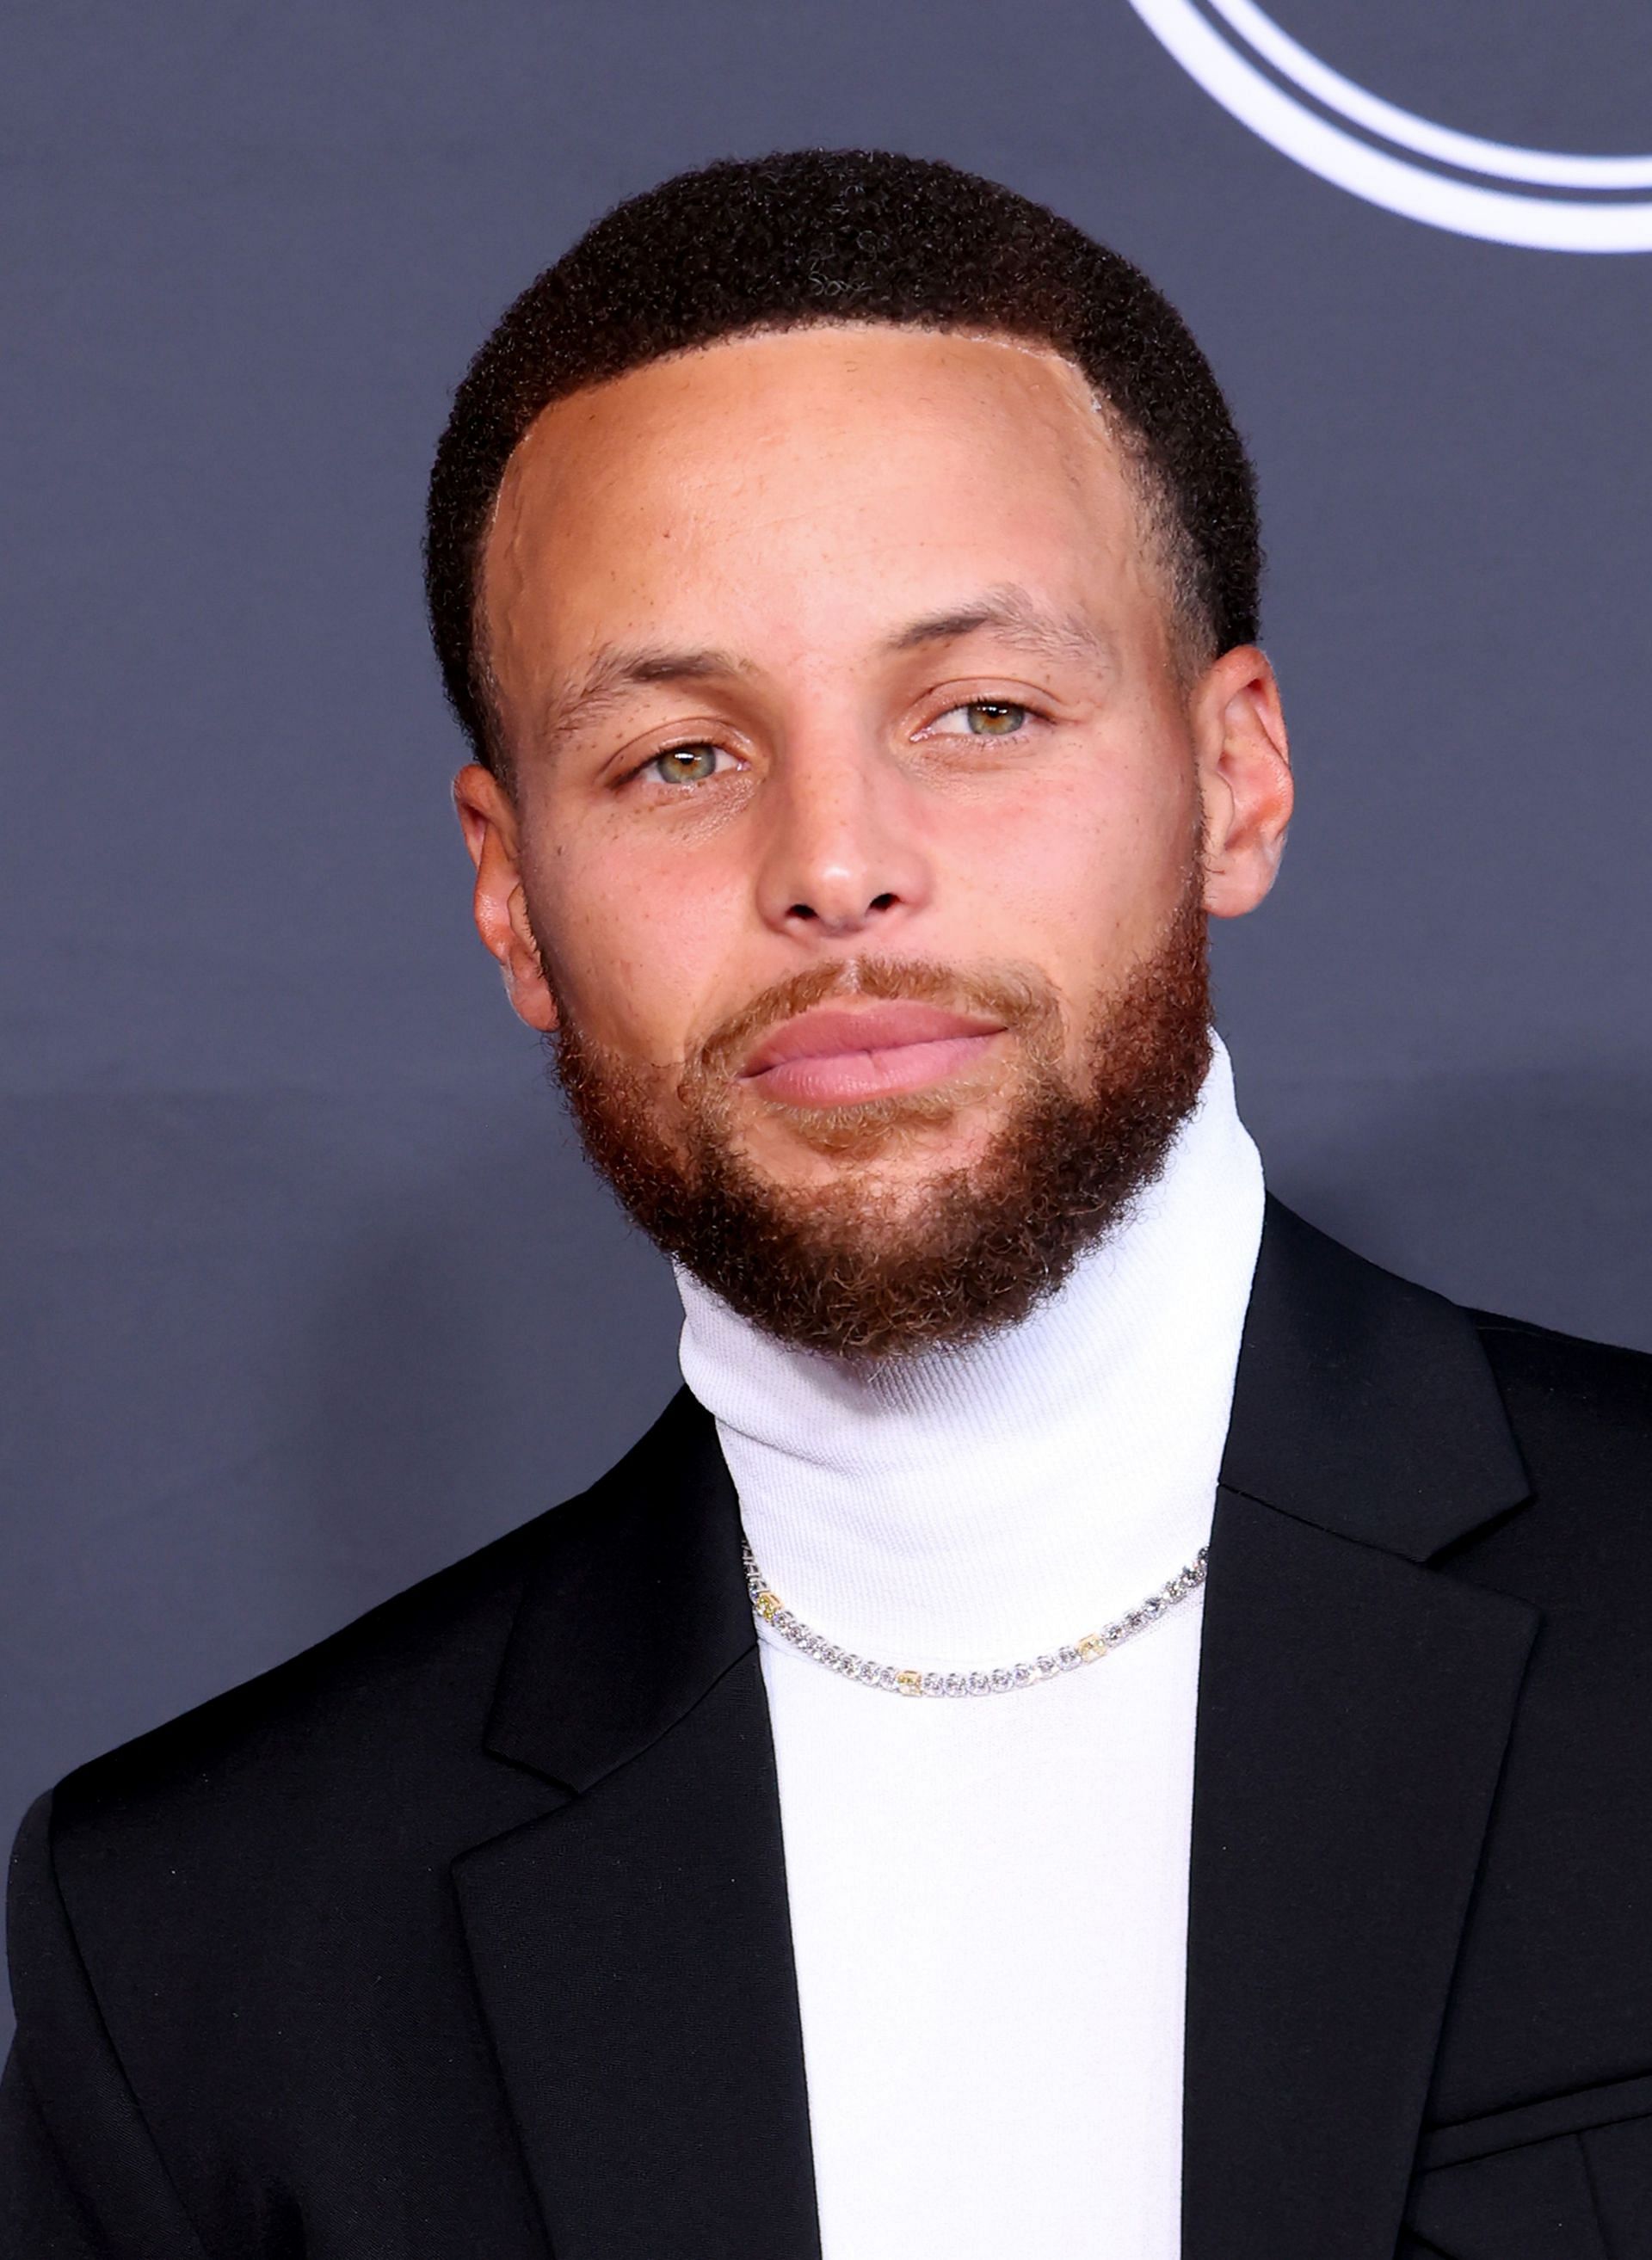 Stephen Curry at the 2022 ESPYs.